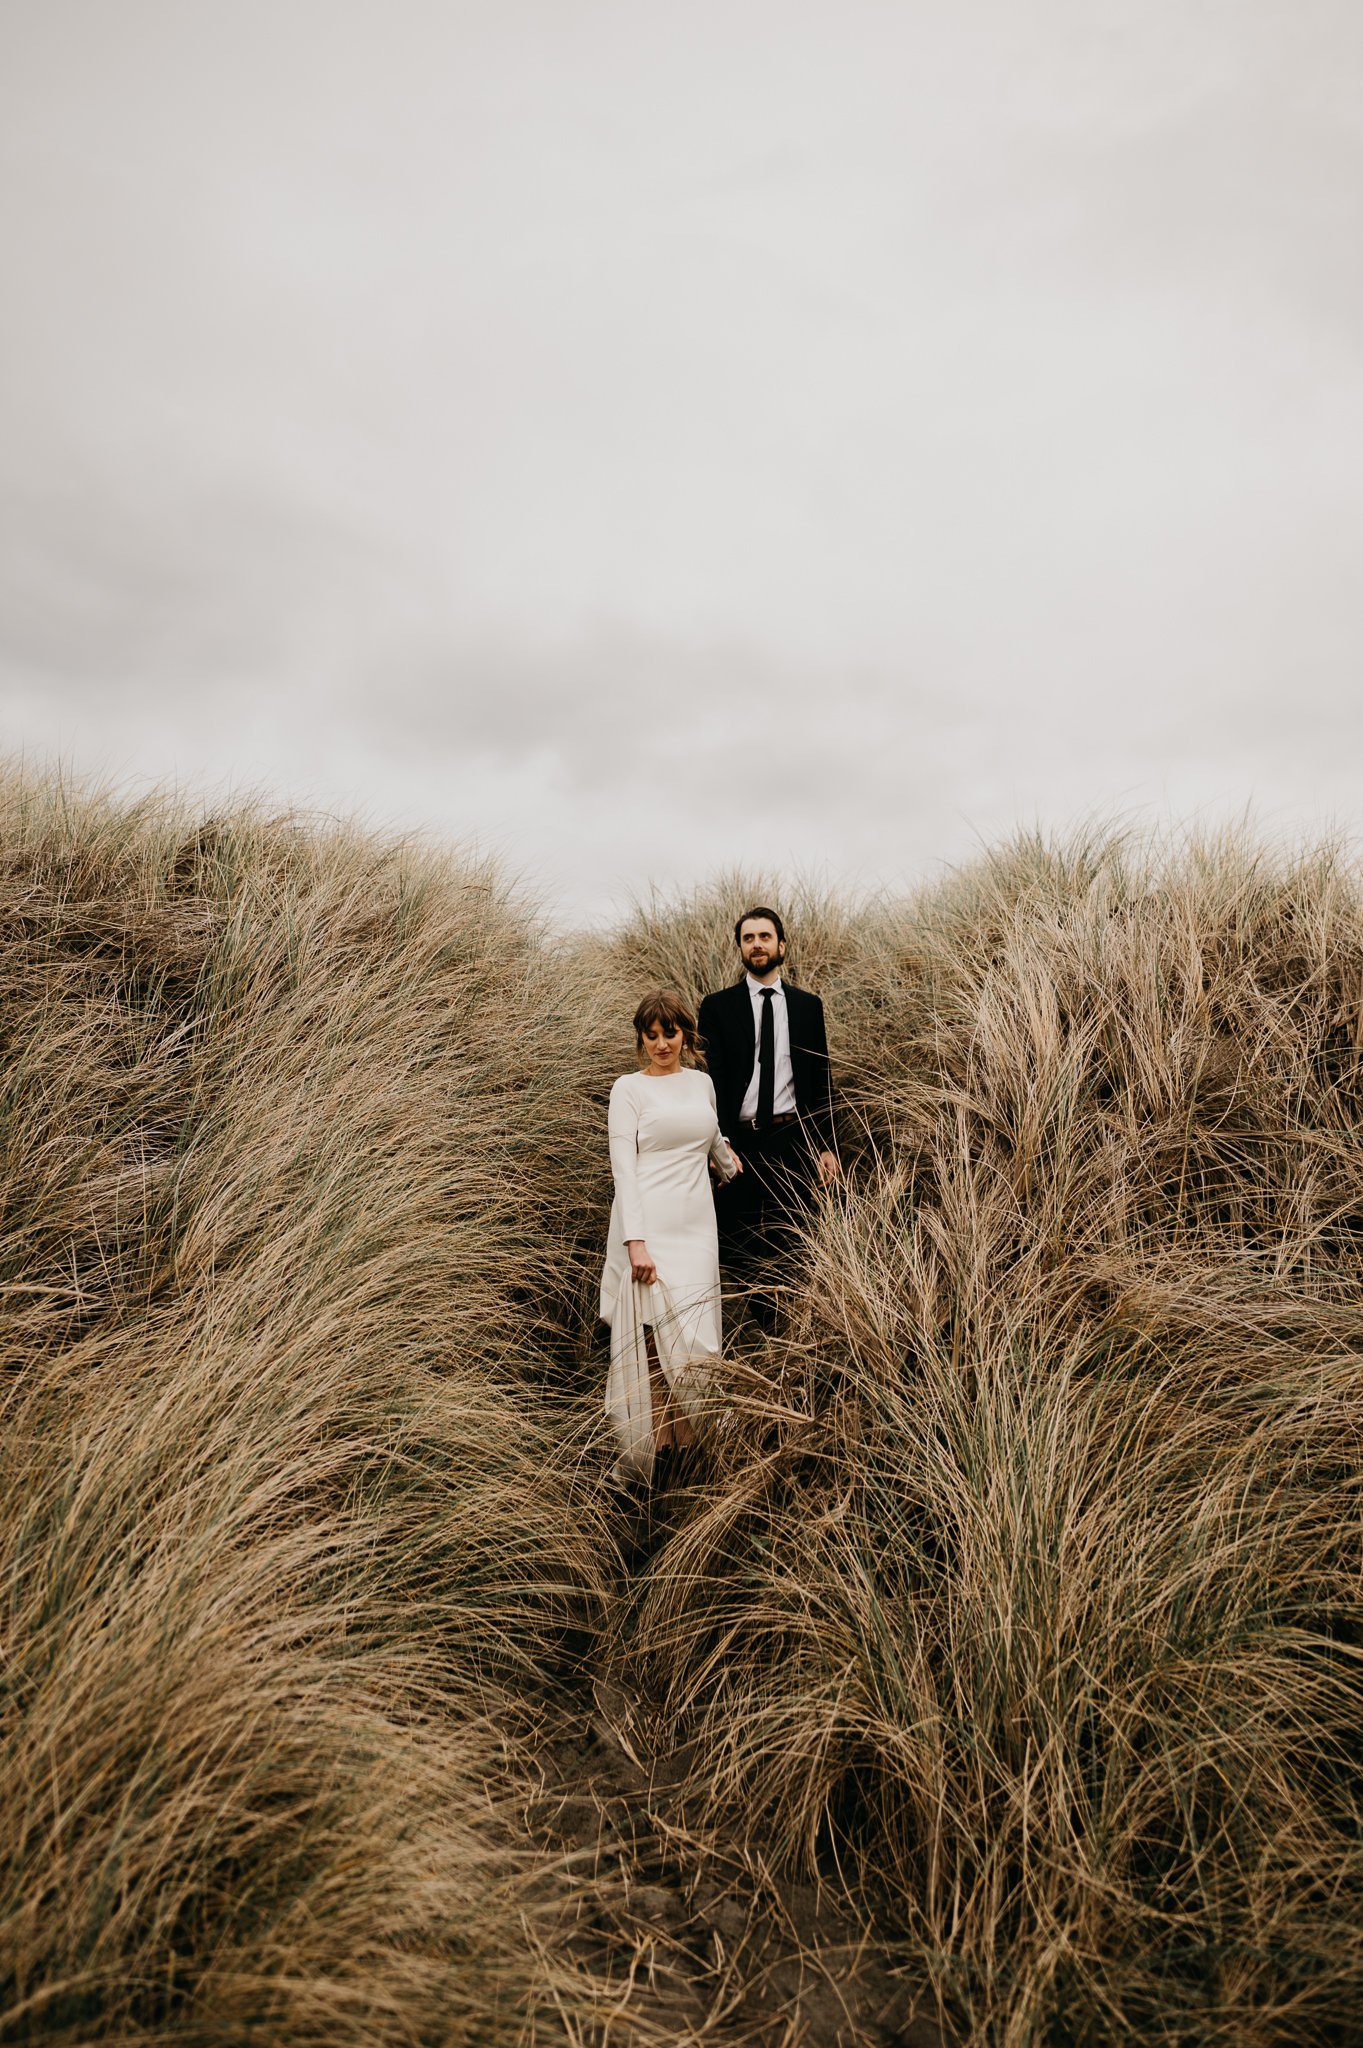 Bride and groom in wedding attire standing side by side in the tall Oregon sea grass.